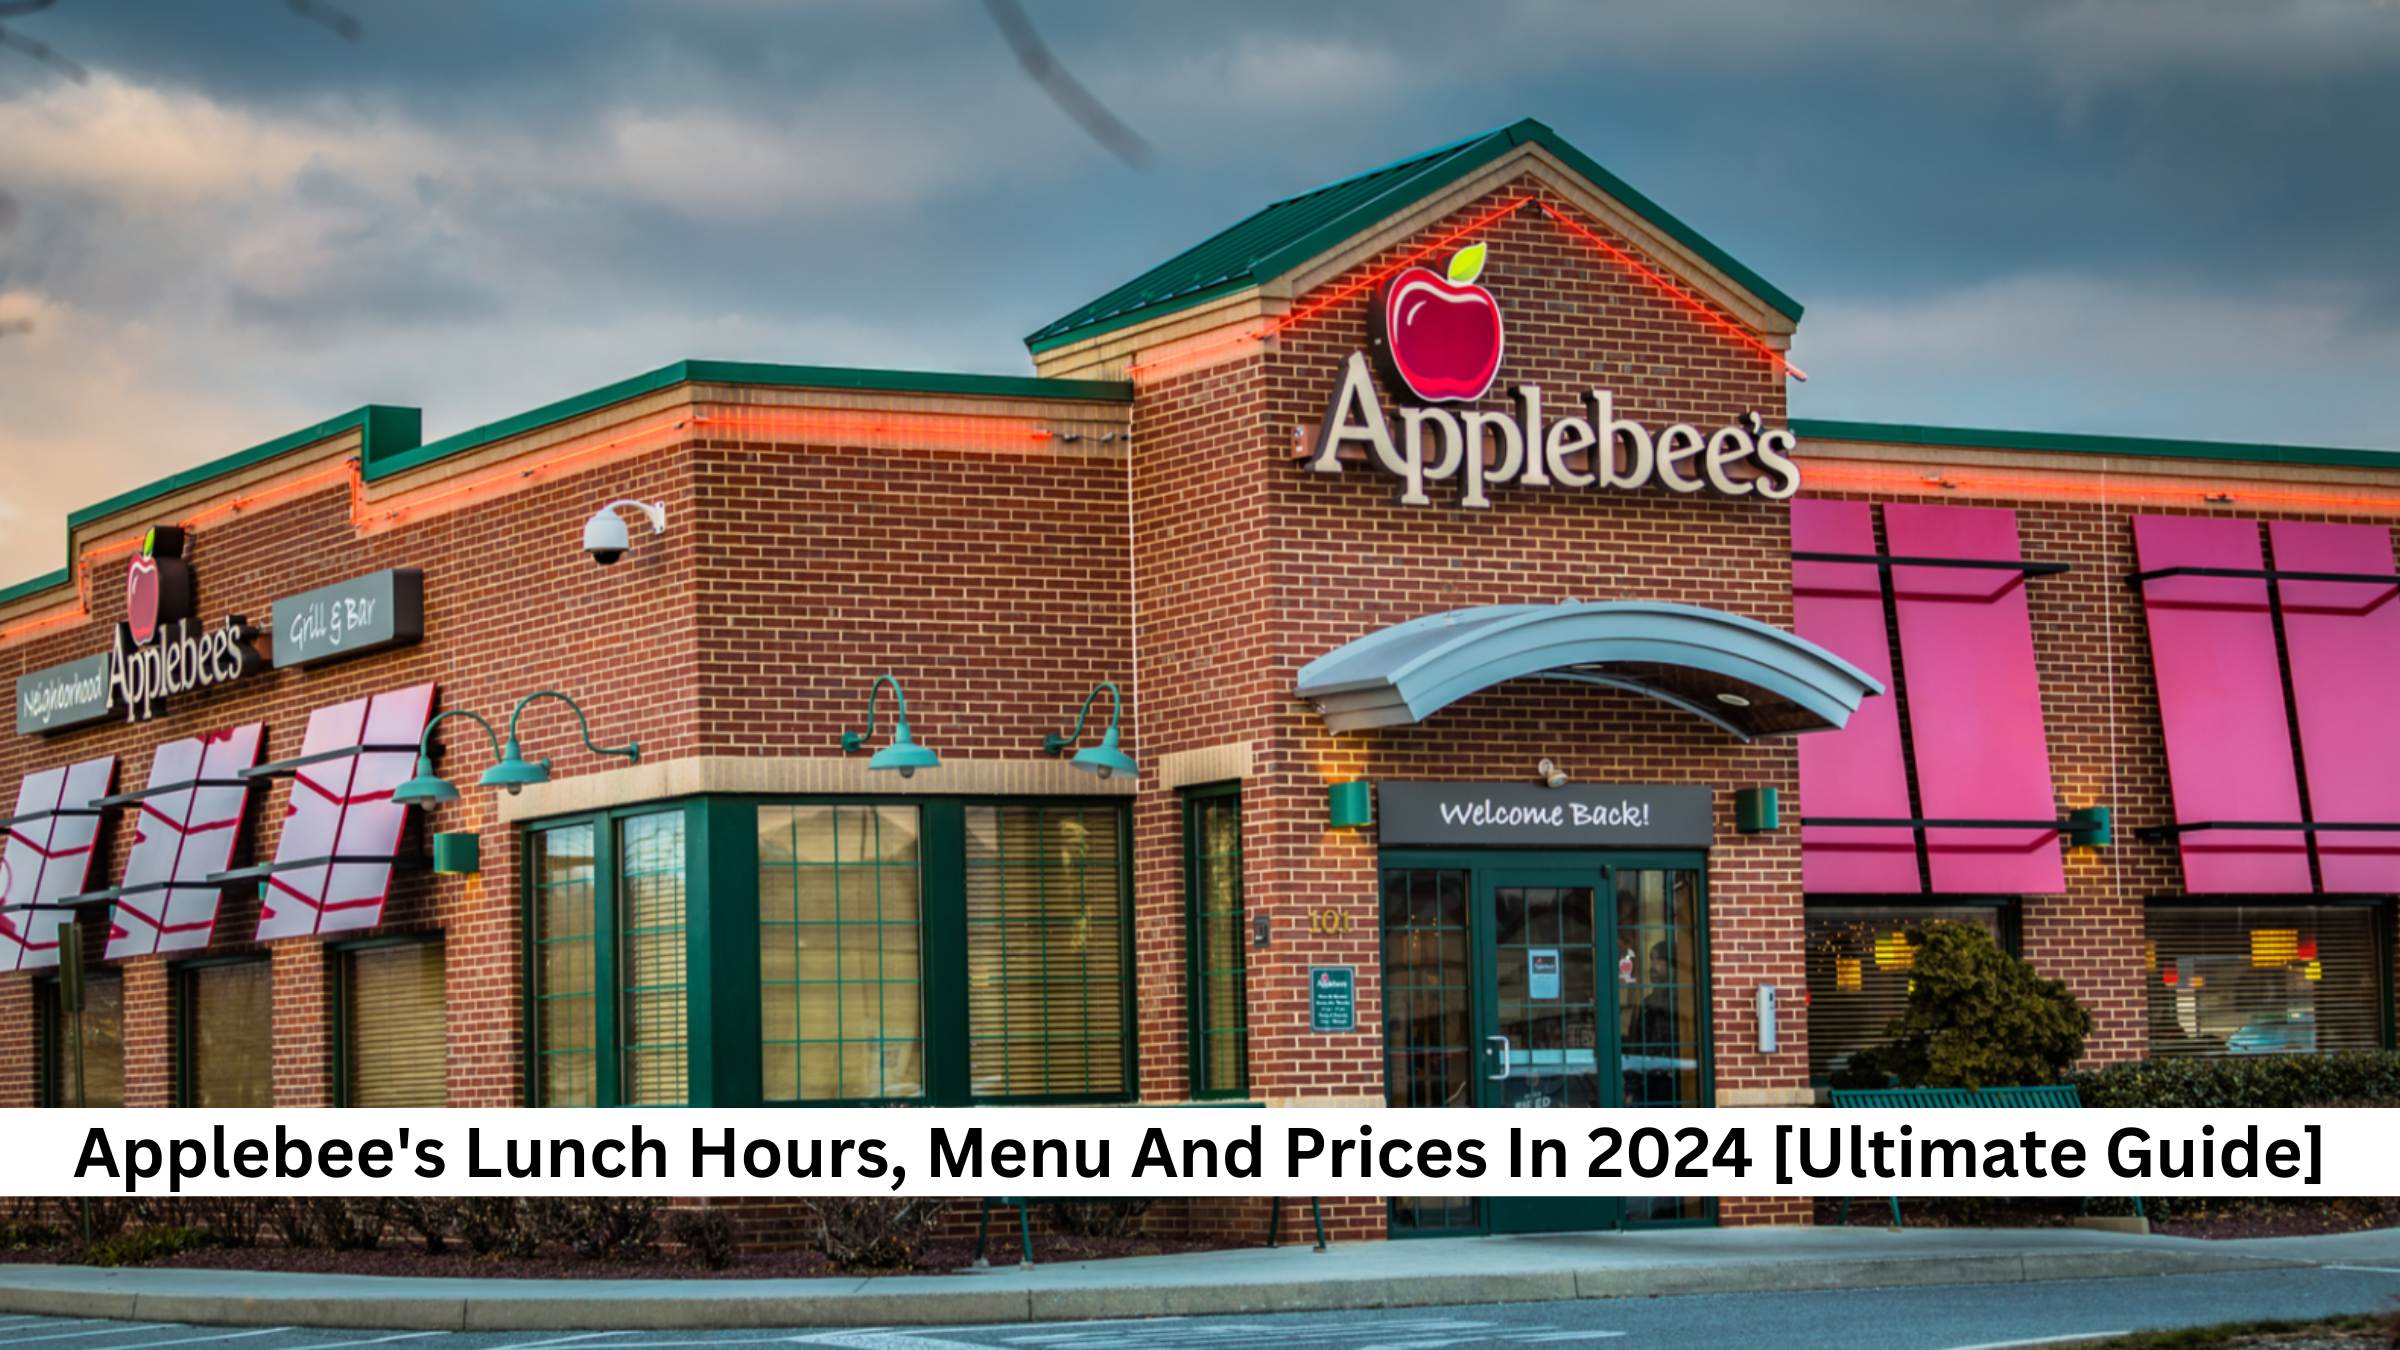 Applebee's Lunch Hours, Menu And Prices In 2024 [Ultimate Guide]